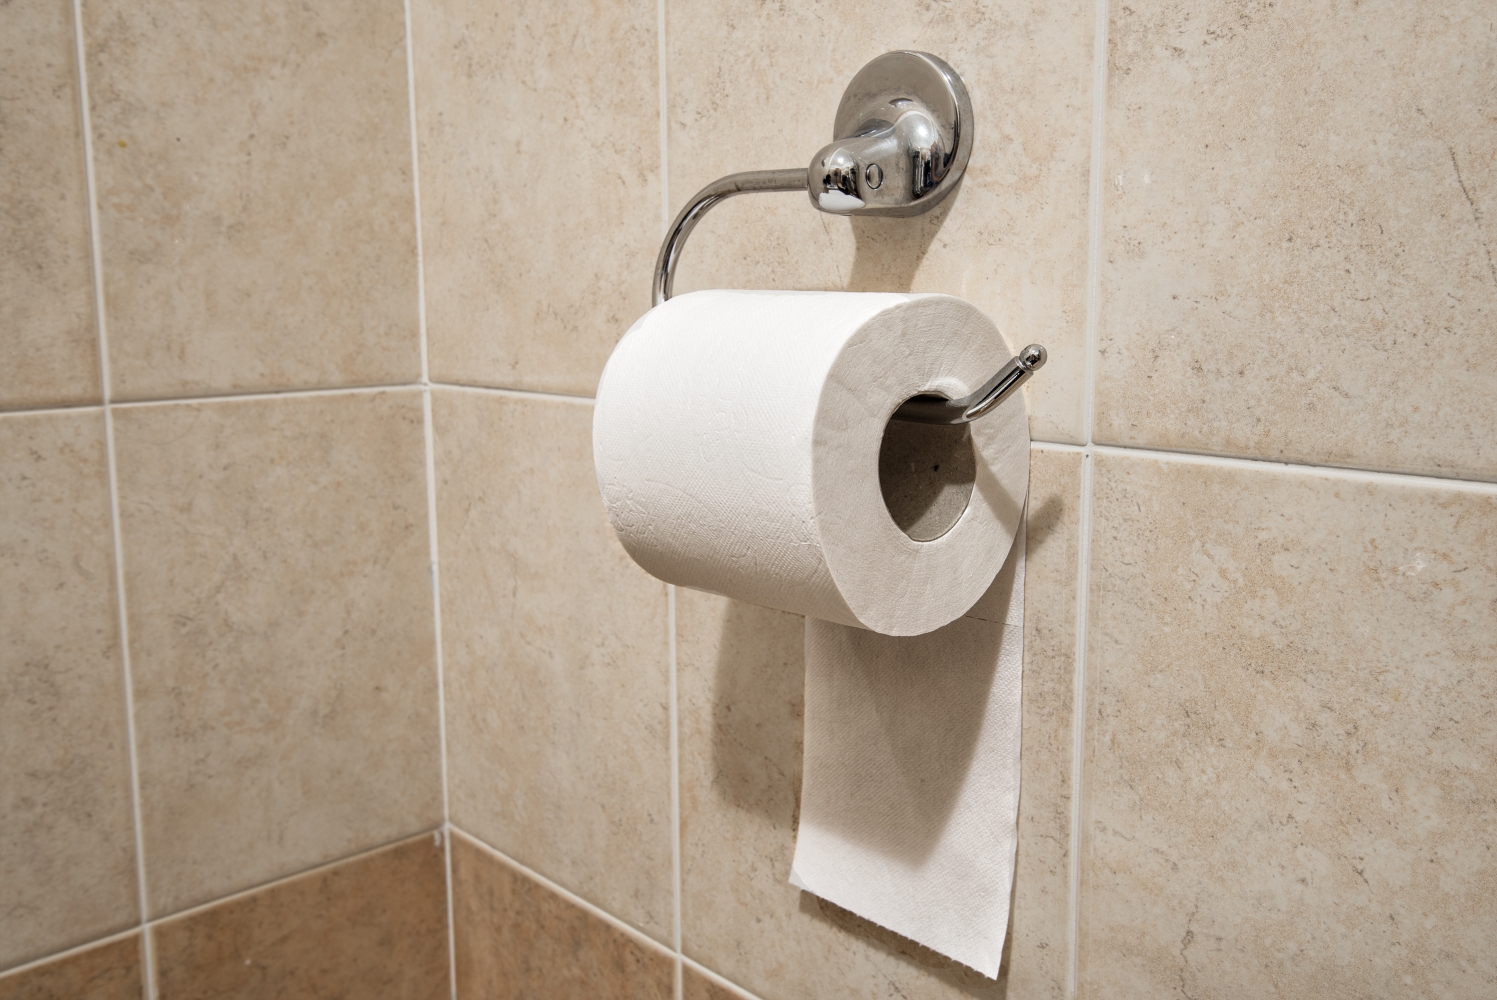 Make toilet paper last longer with the Toilet Paper Roll Repairer!